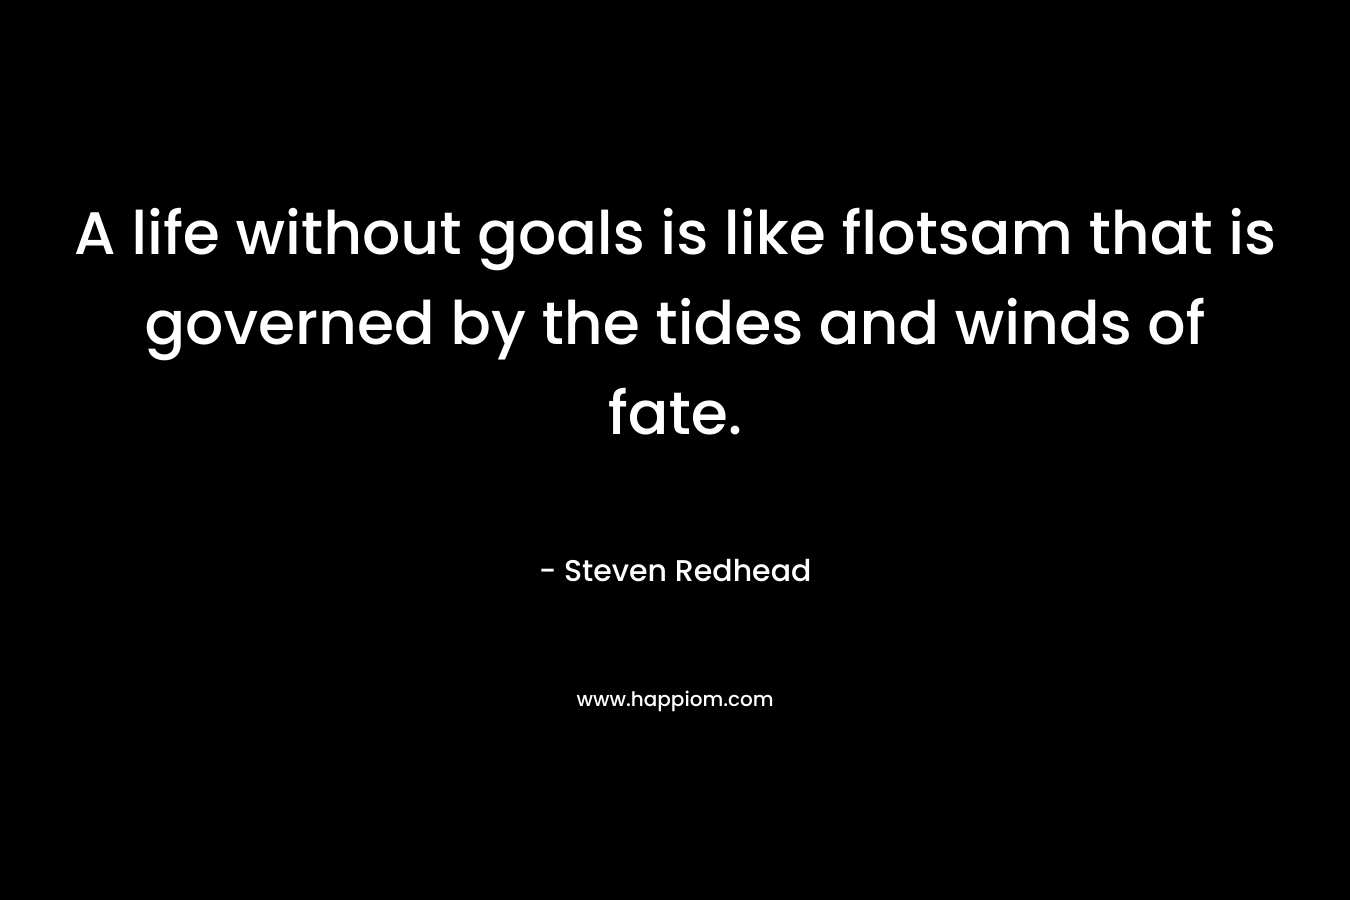 A life without goals is like flotsam that is governed by the tides and winds of fate. – Steven Redhead